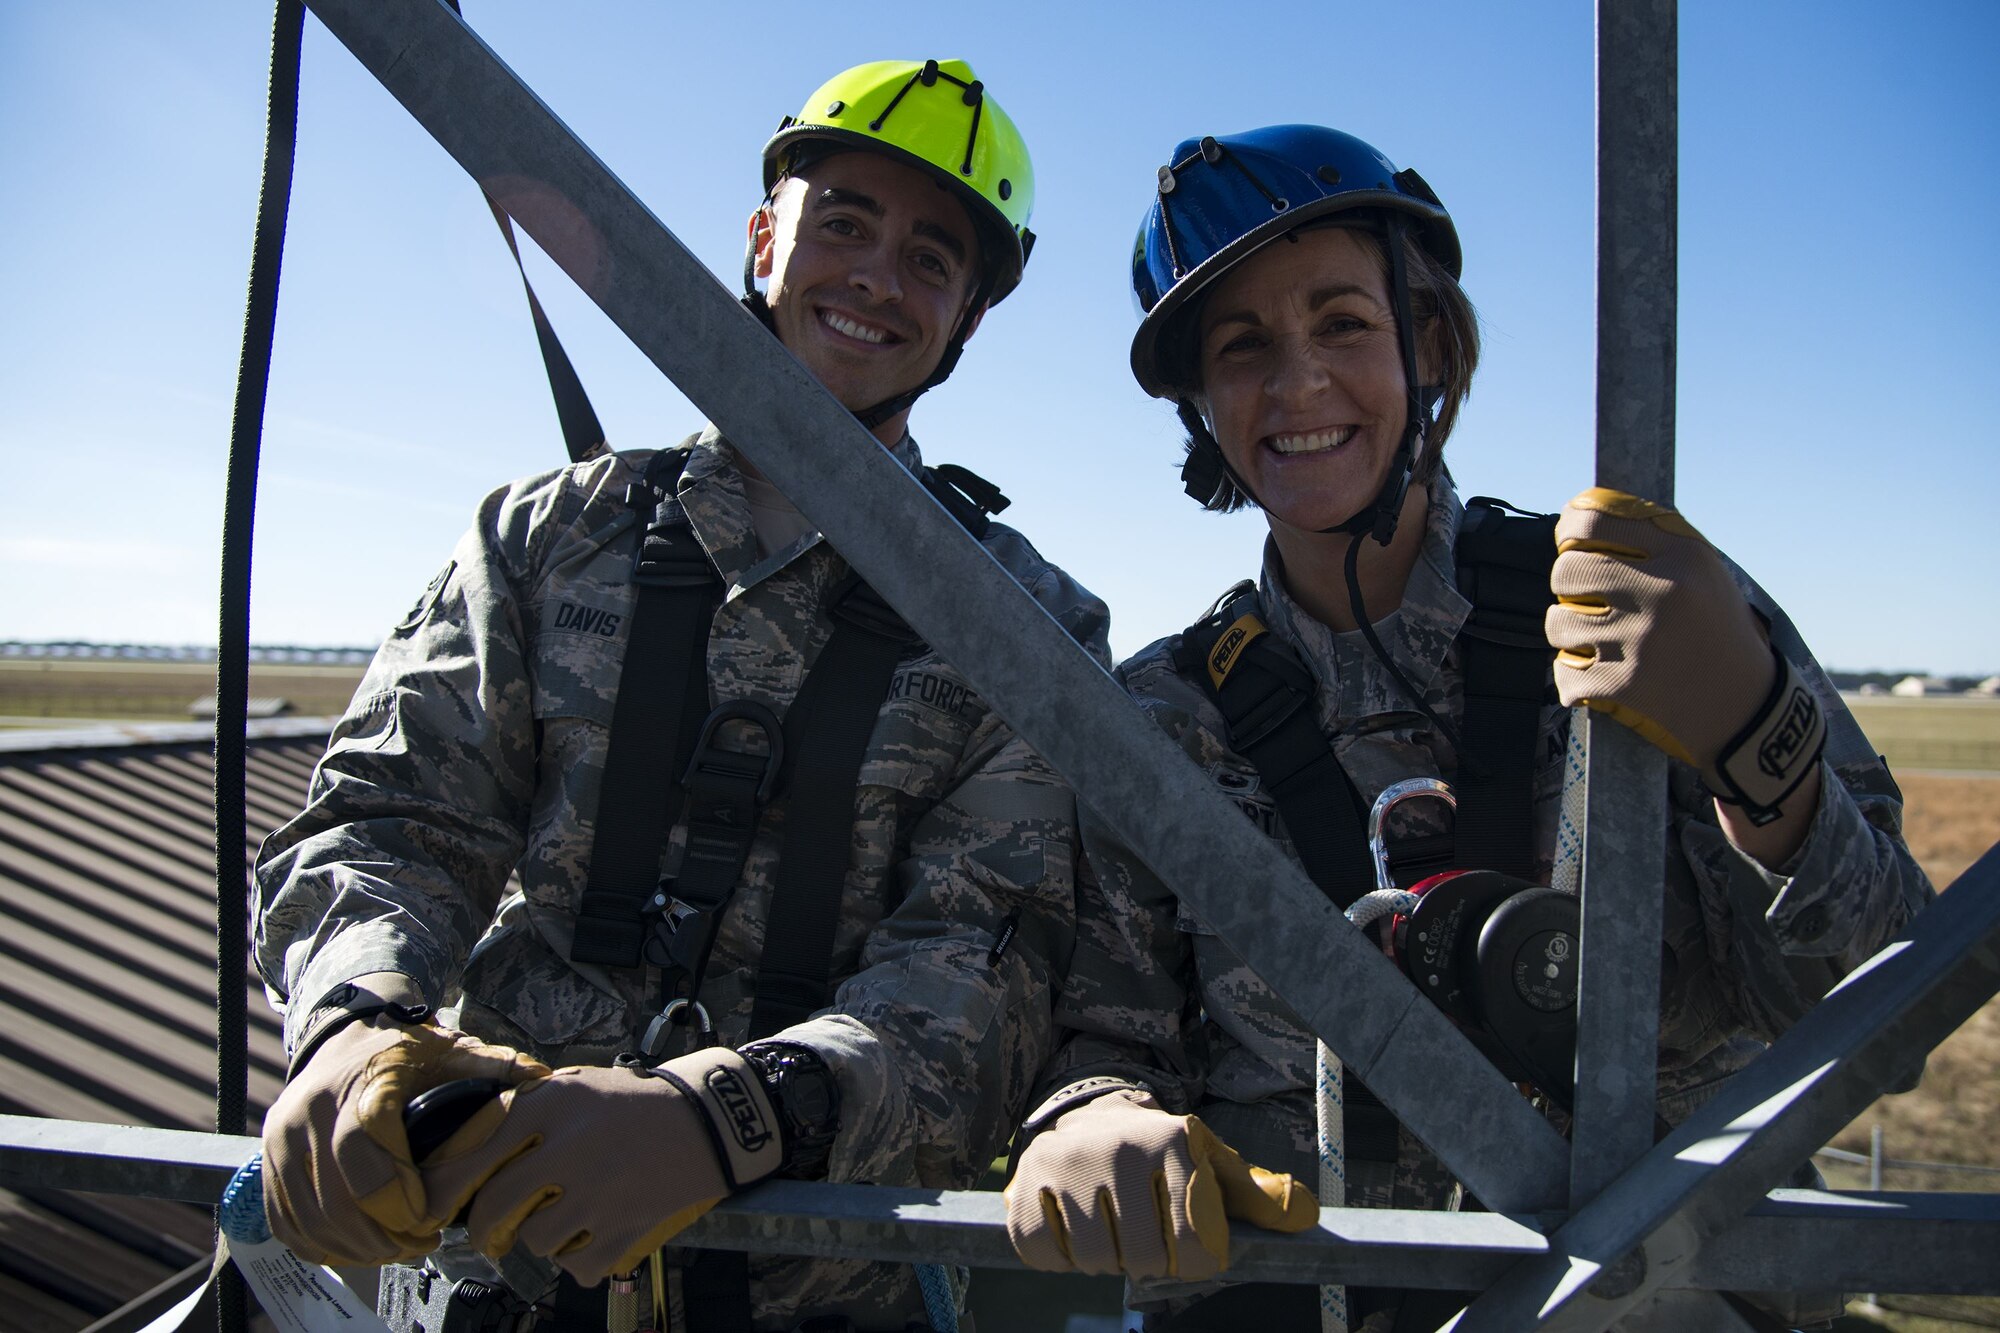 Senior Airman Grant Davis, left, 23d Operations Support Squadron (OSS) radar, airfield and weather systems (RAWS) technician, and Col. Jennifer Short, 23d Wing commander, pose for a photo during an immersion tour, Dec. 11, 2017, at Moody Air Force Base, Ga. Moody leadership visited the RAWS facility to familiarize themselves with the 23d OSS’s duties and to gain a better understanding of how they impact the mission. (U.S. Air Force photo by Airman 1st Class Erick Requadt)